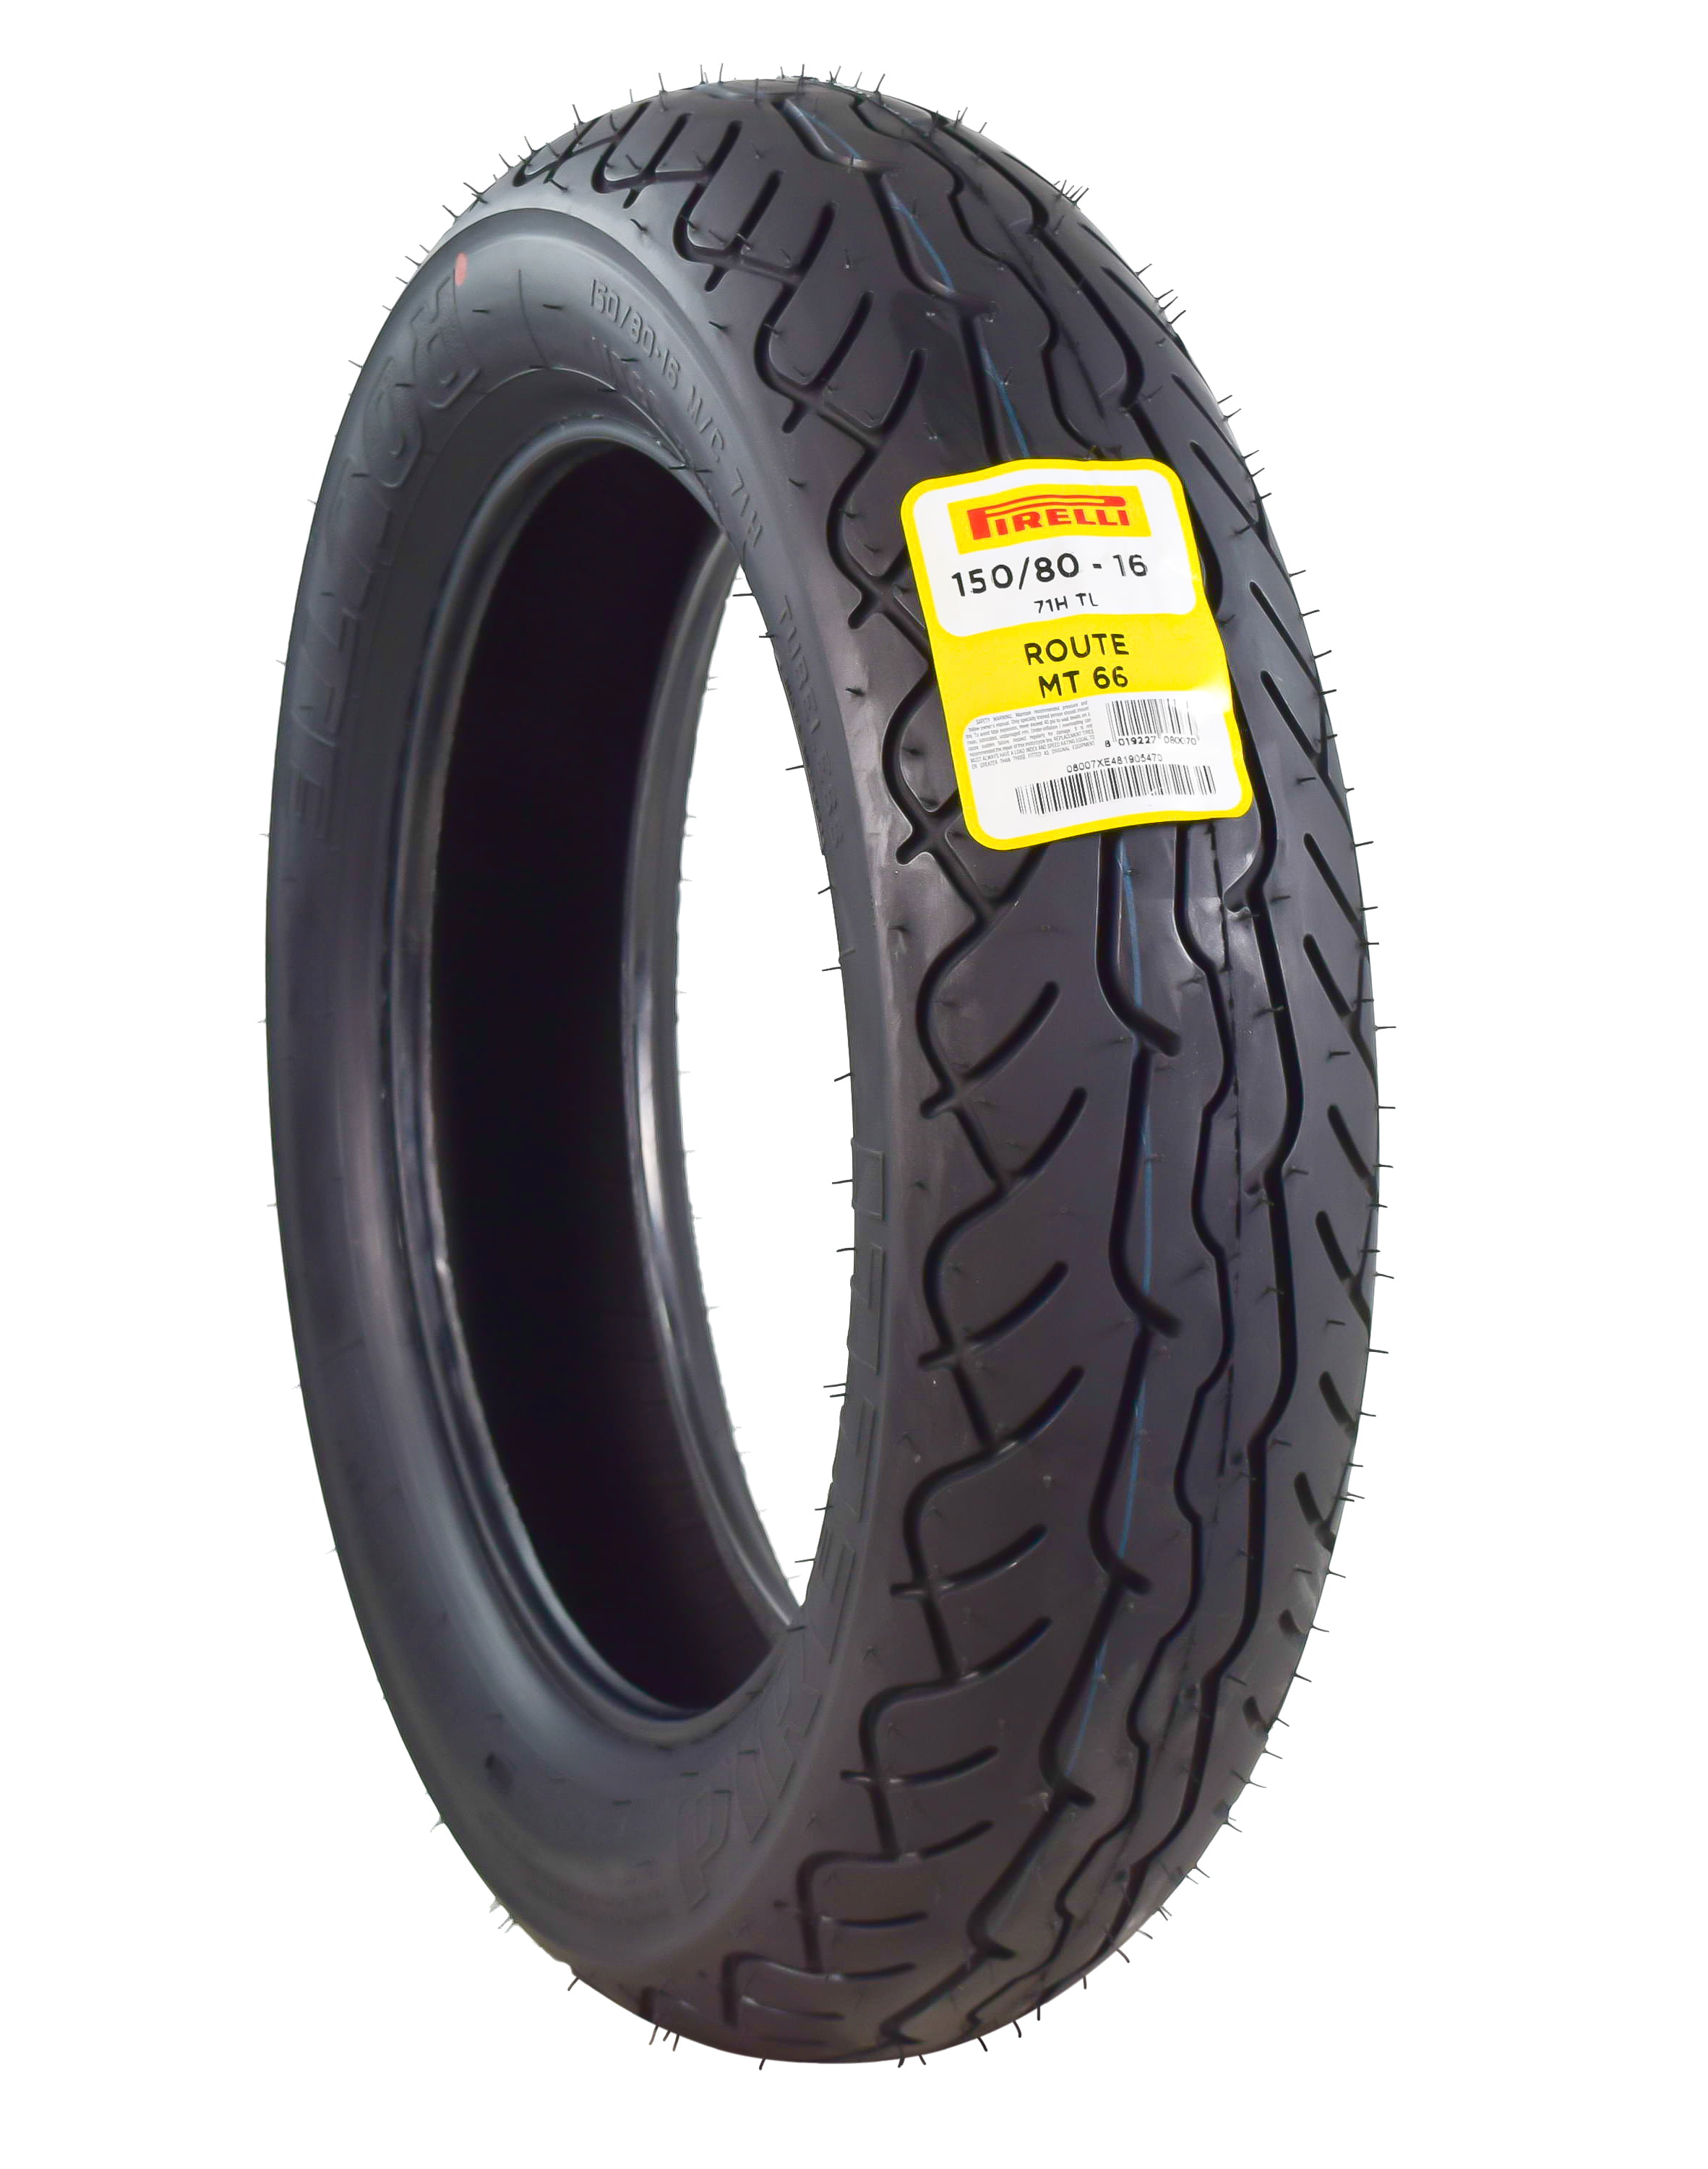 Pirelli MT66 Route Tire Load Rating: 71 Tire Size: 140/90-16 Speed Rating: H Tire Application: Cruiser 0851900 Rear Rim Size: 16 140/90-16 Tire Type: Street Position: Rear 